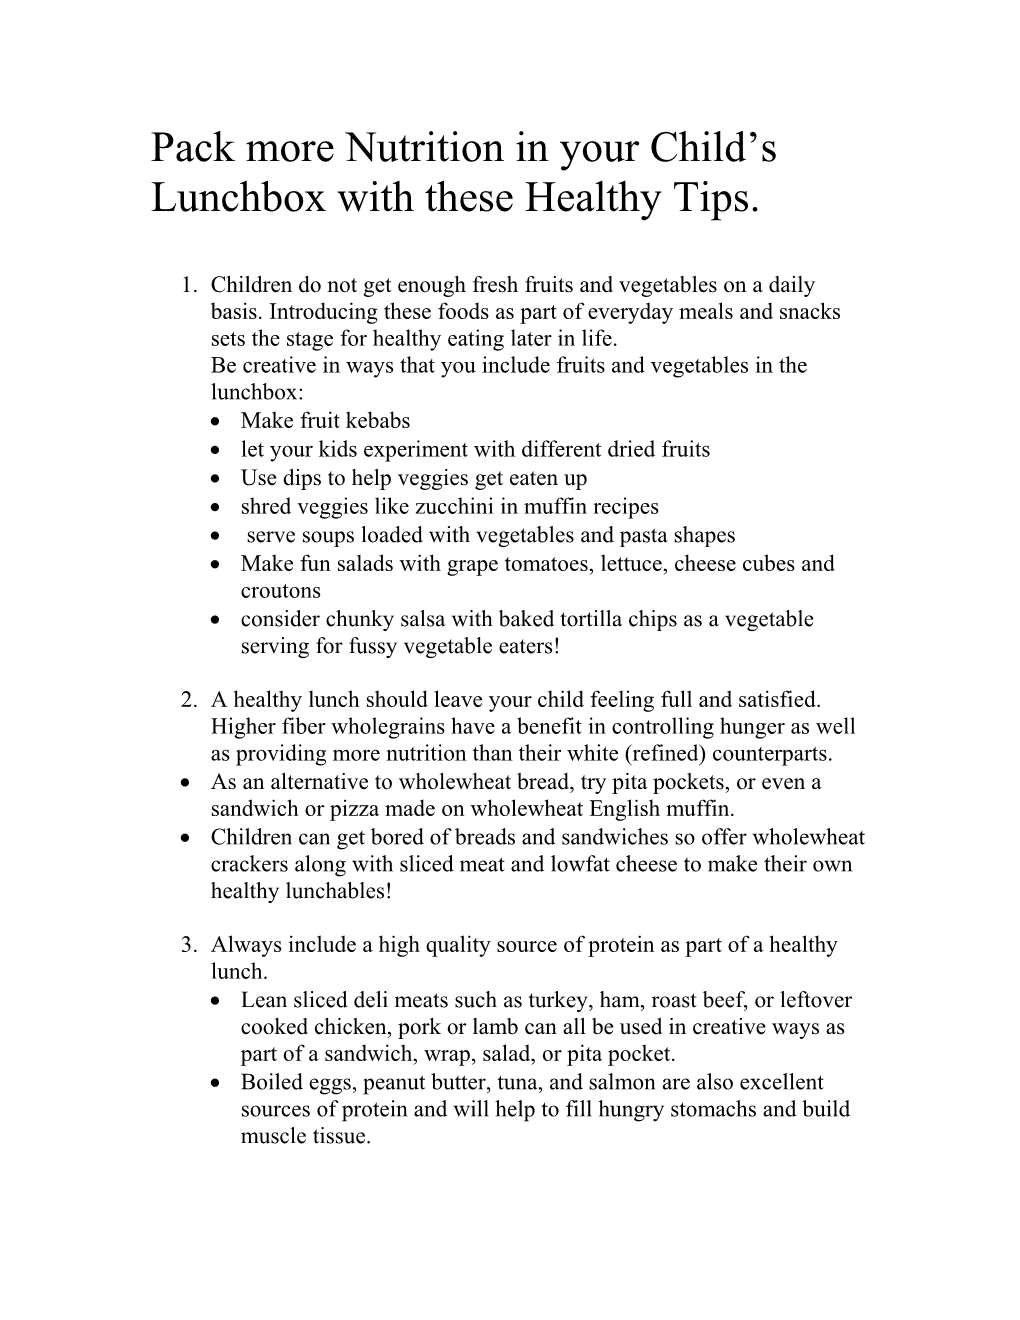 Pack More Nutrition in Your Child S Lunchbox with These Healthy Tips